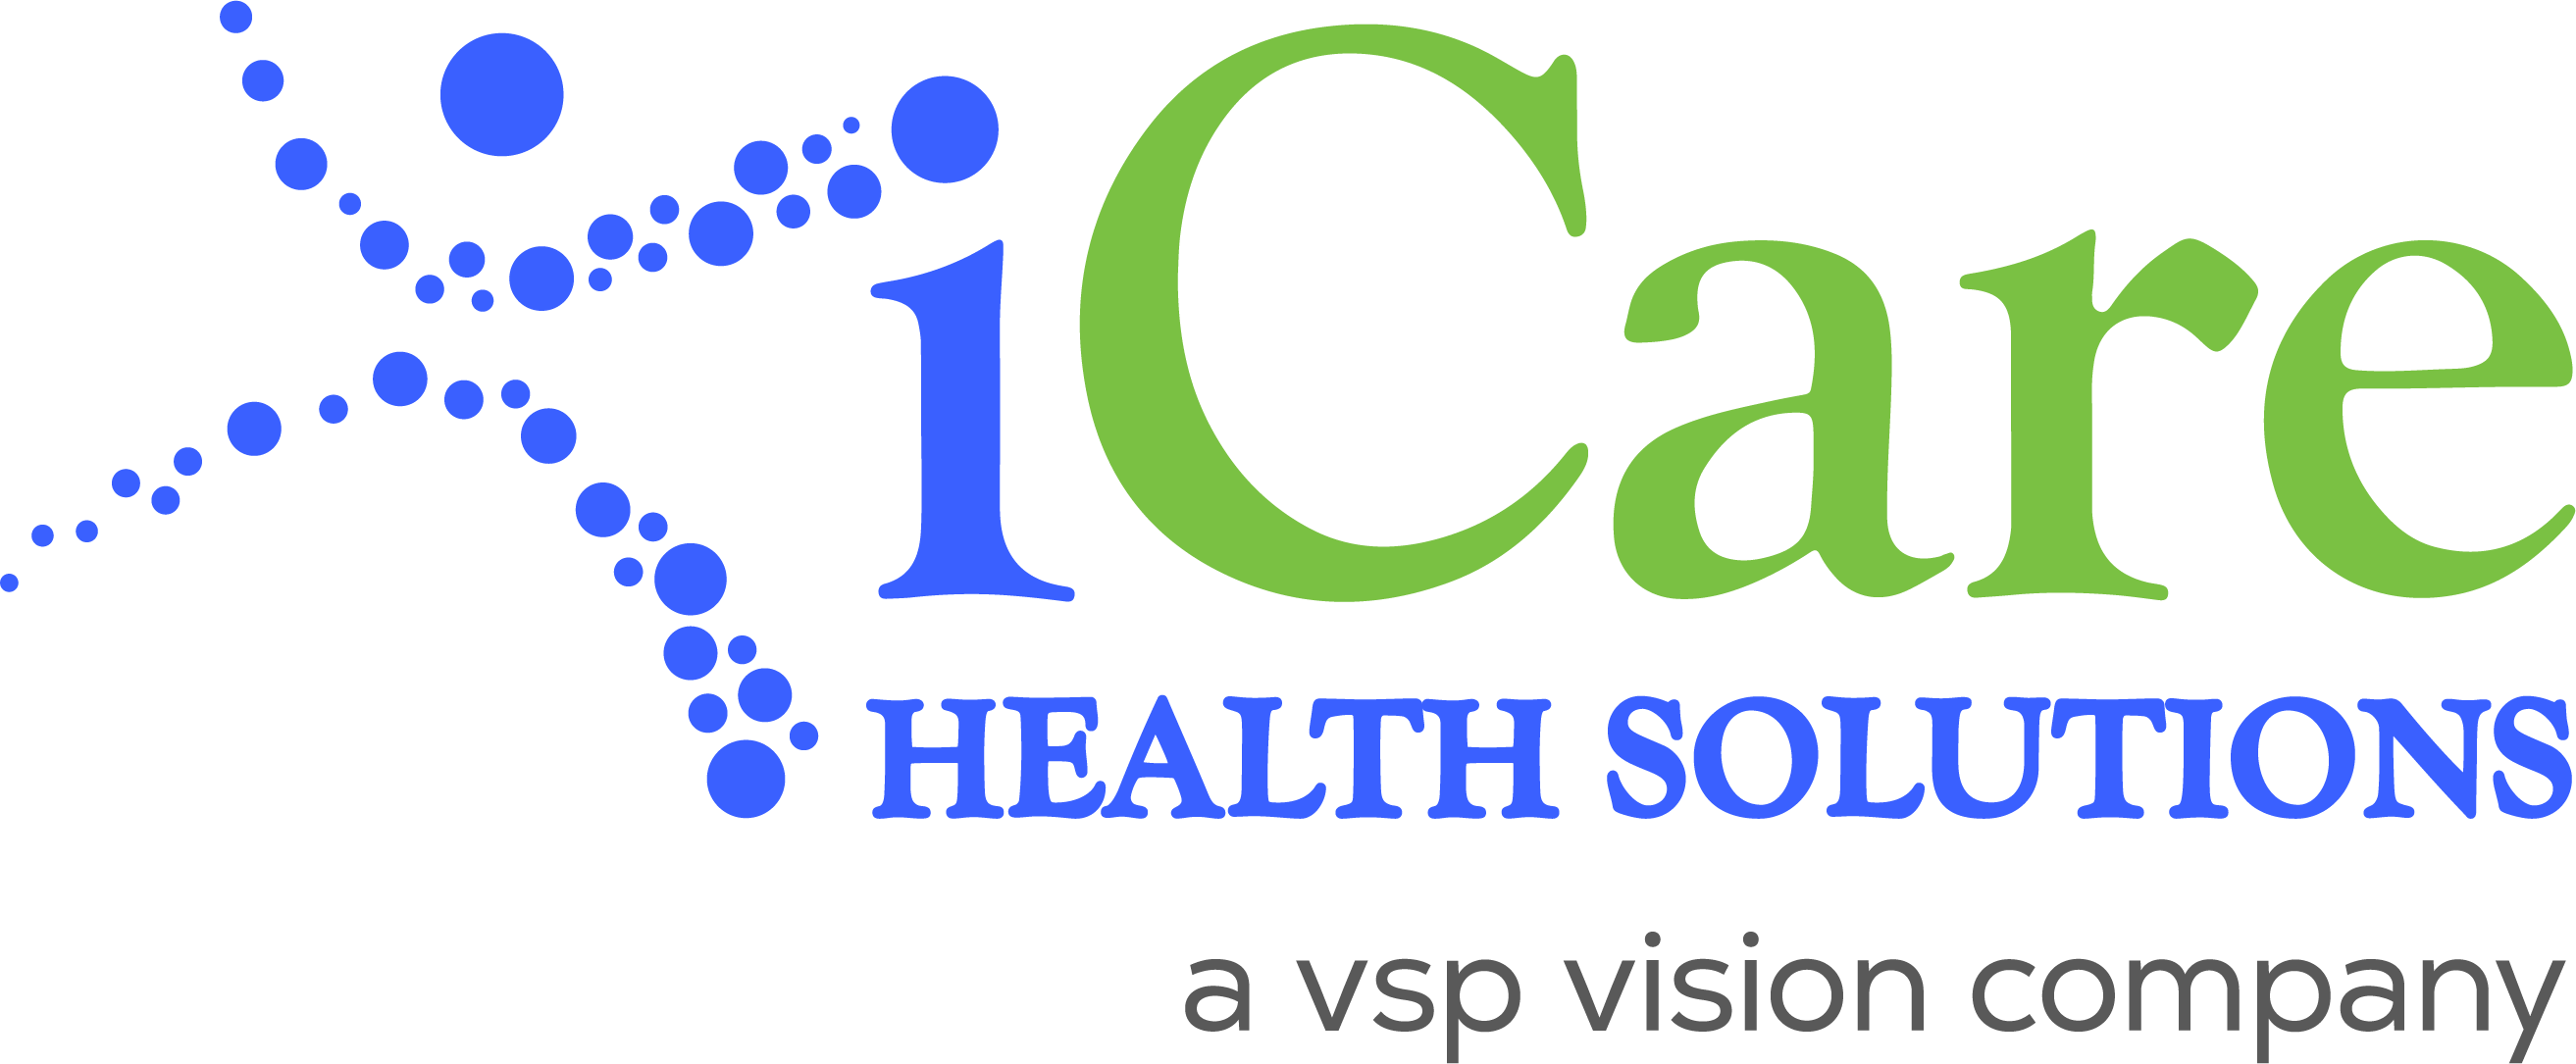 Icare Health Solutions